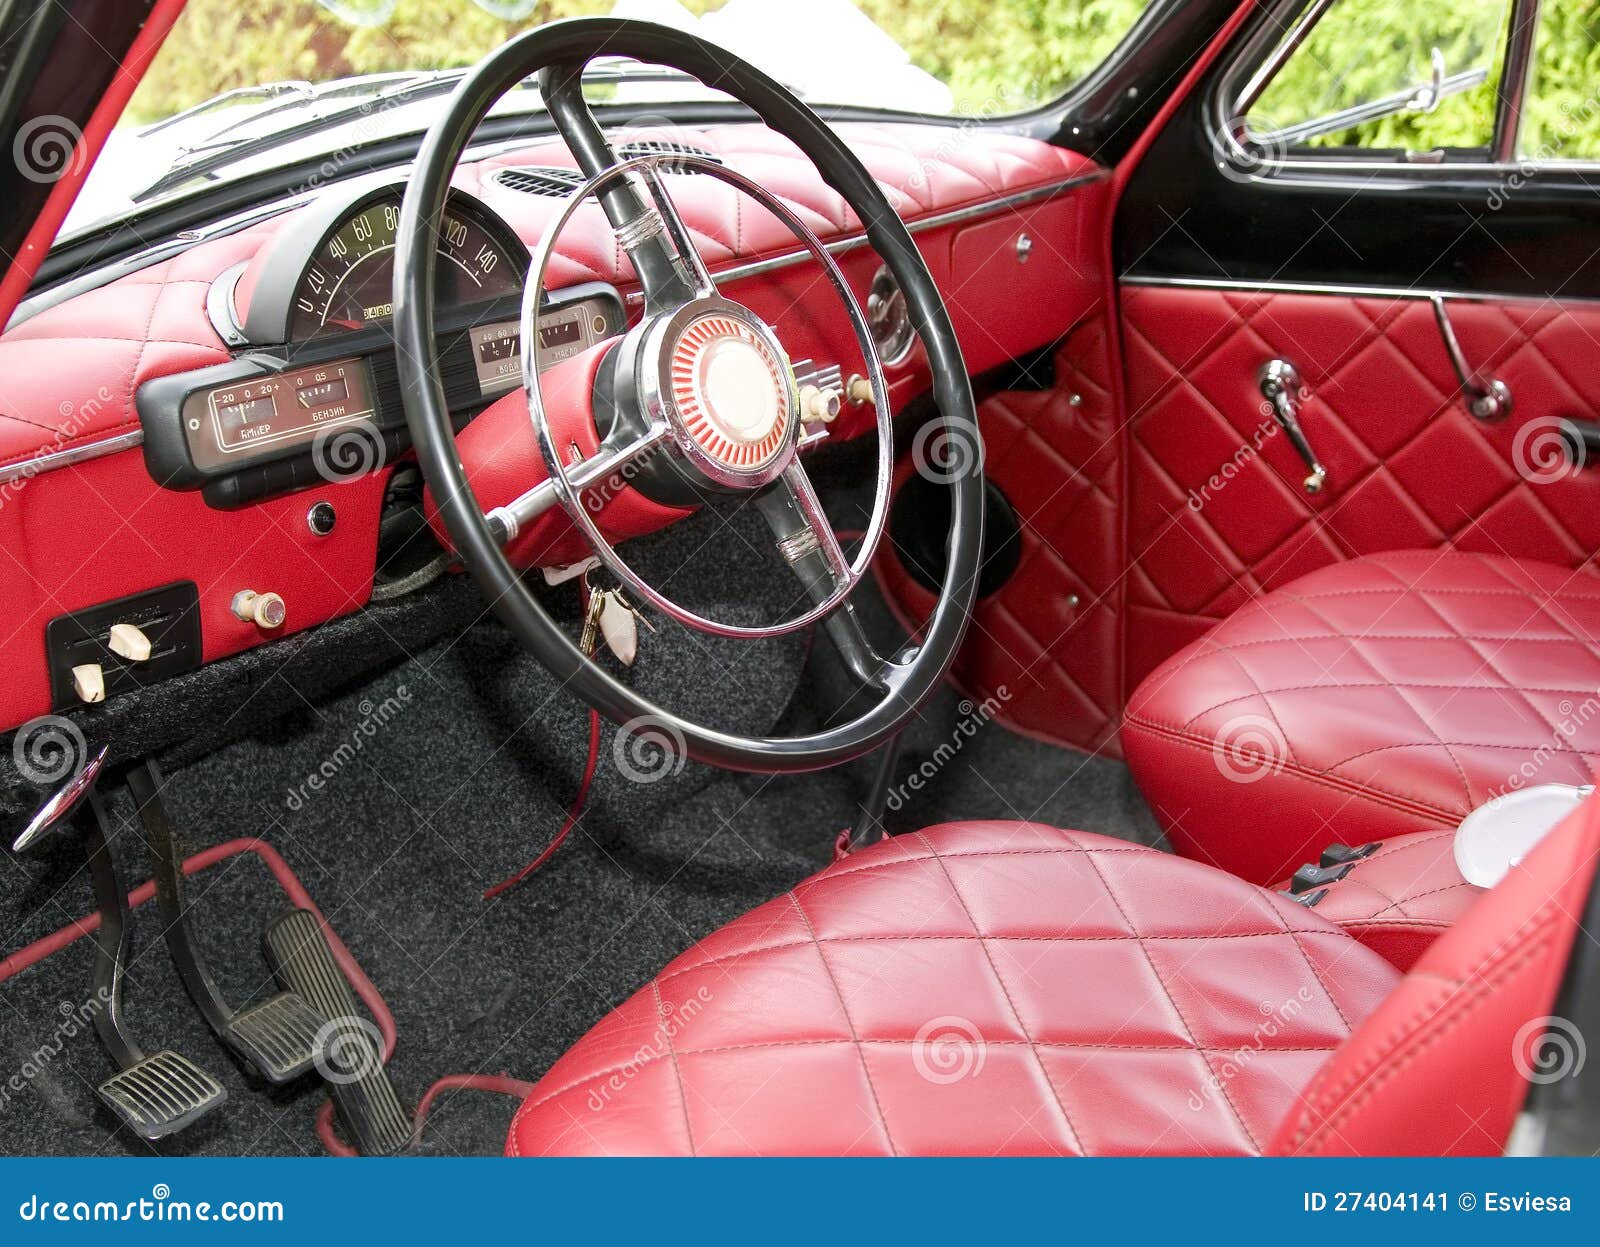 Antique Car With Red Interior Inside Stock Image Image Of